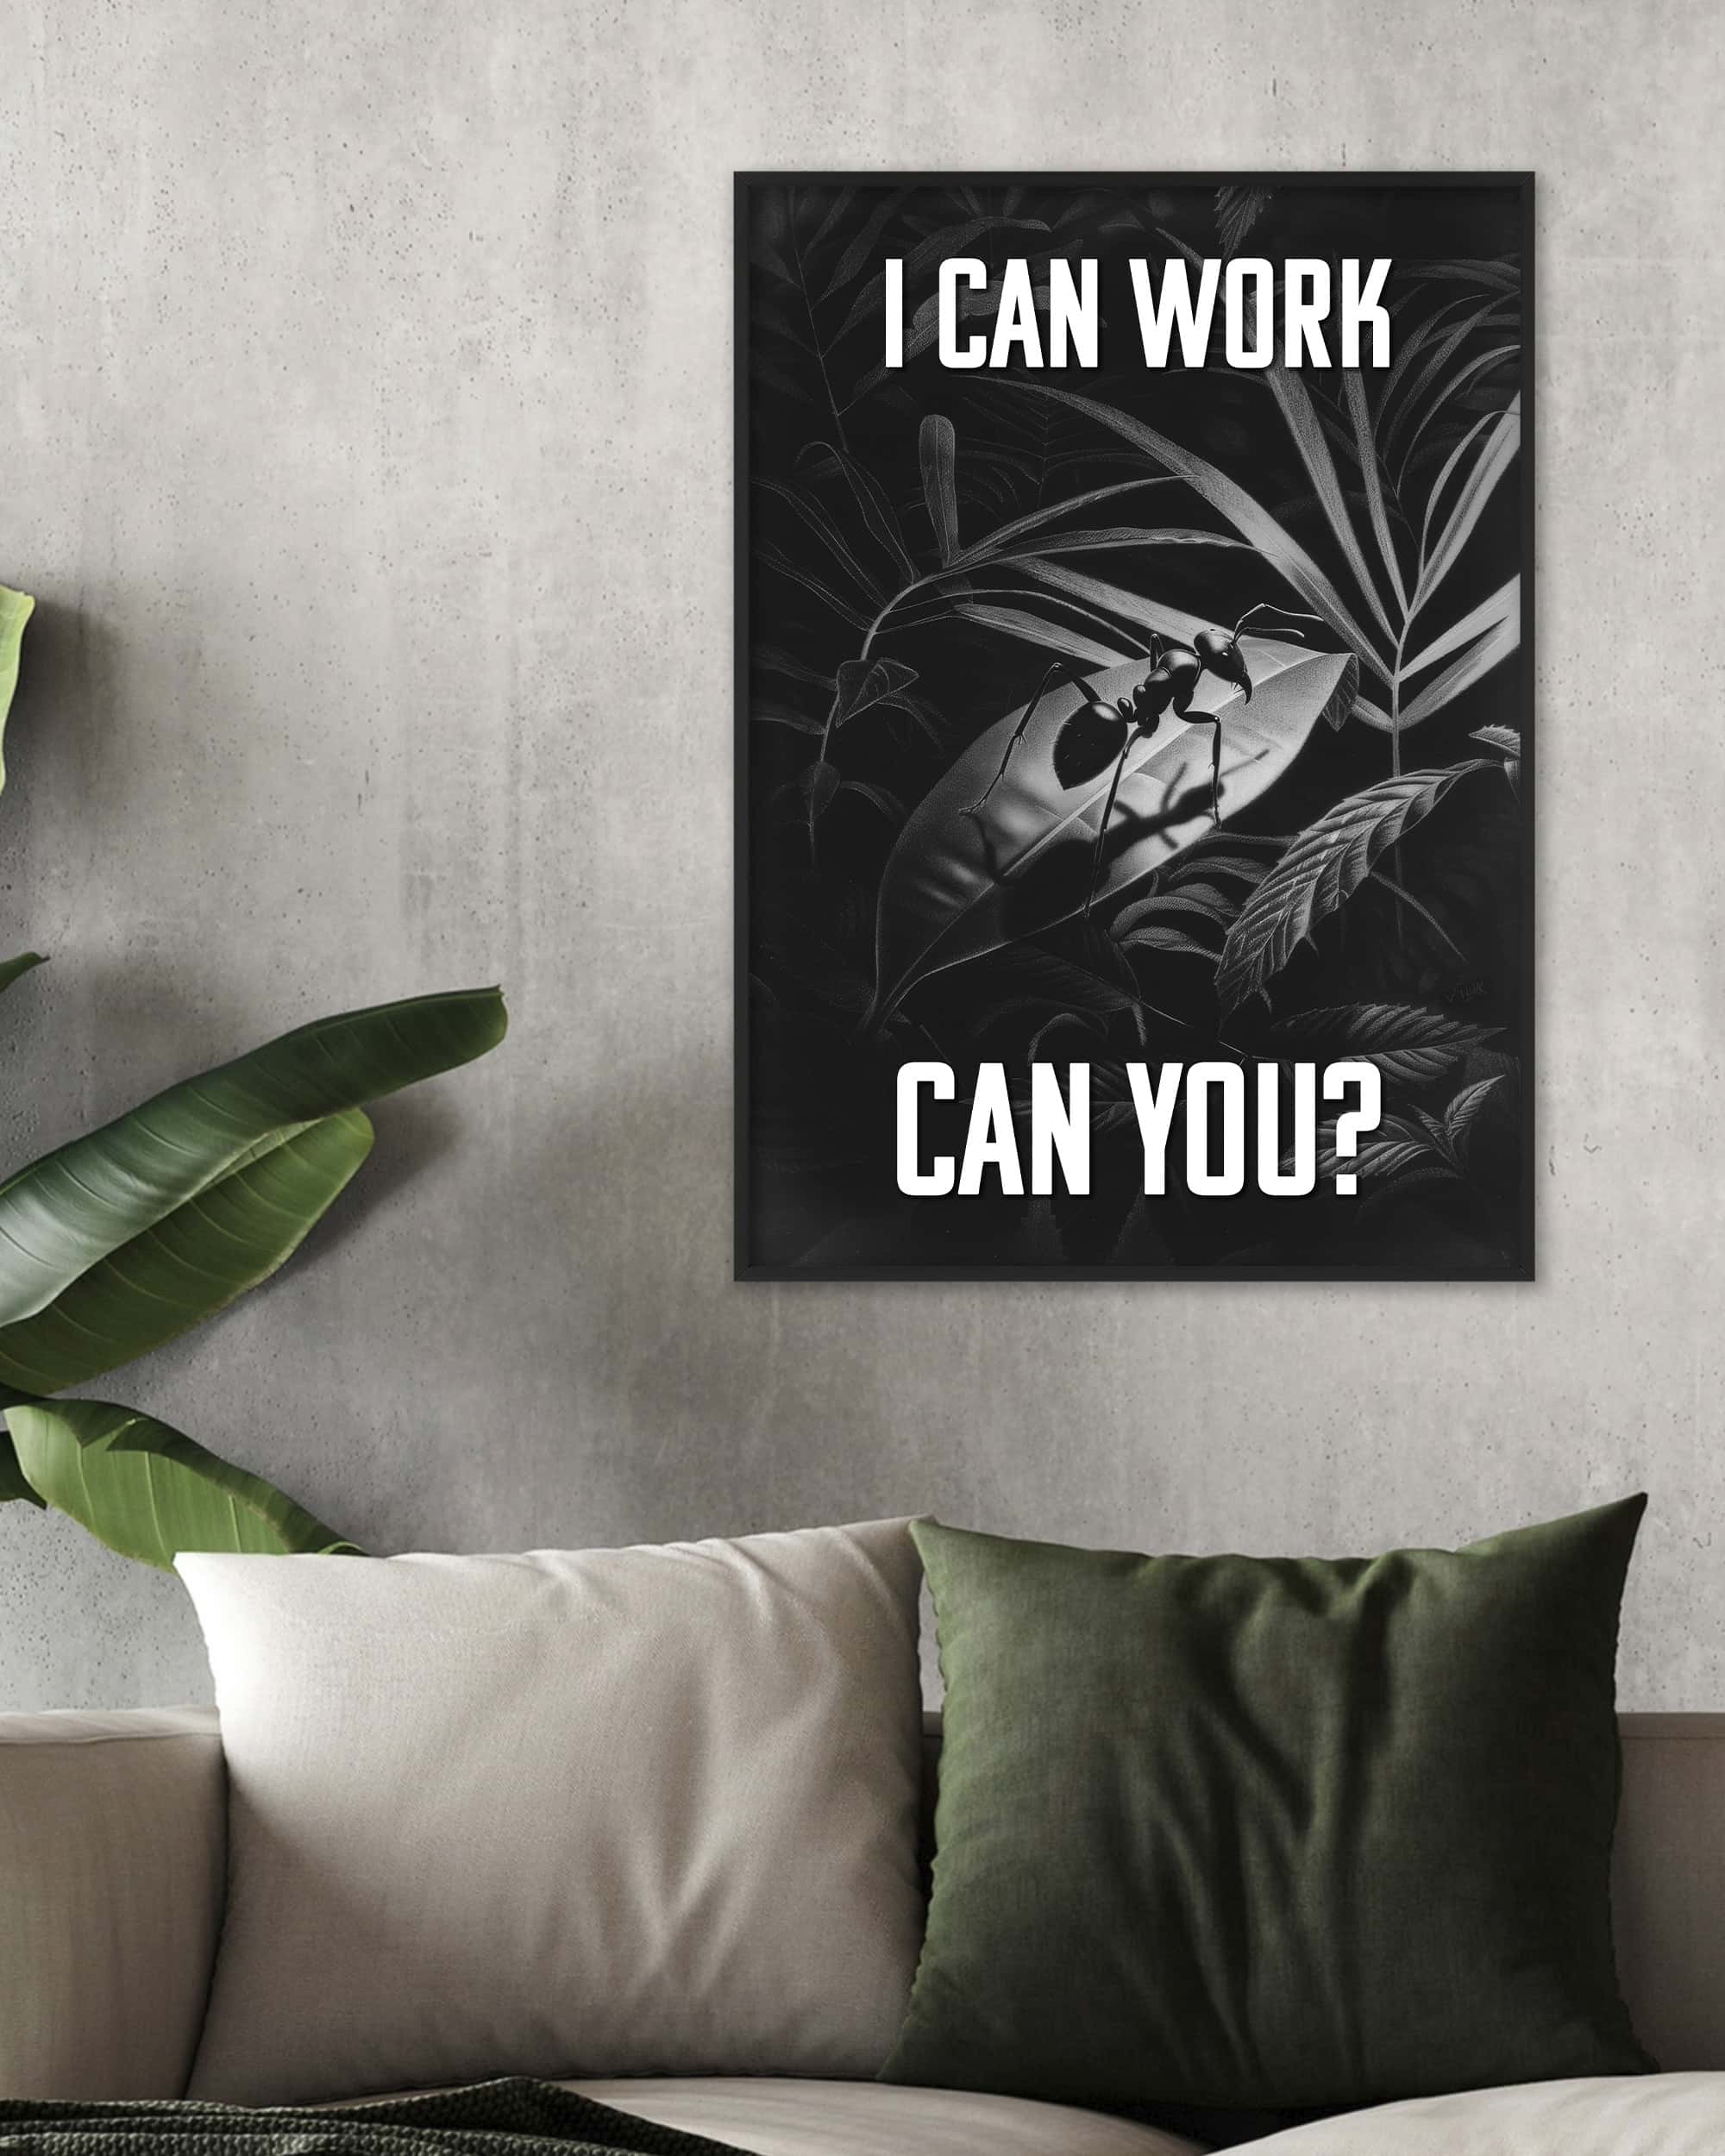 I can work | Digital Poster